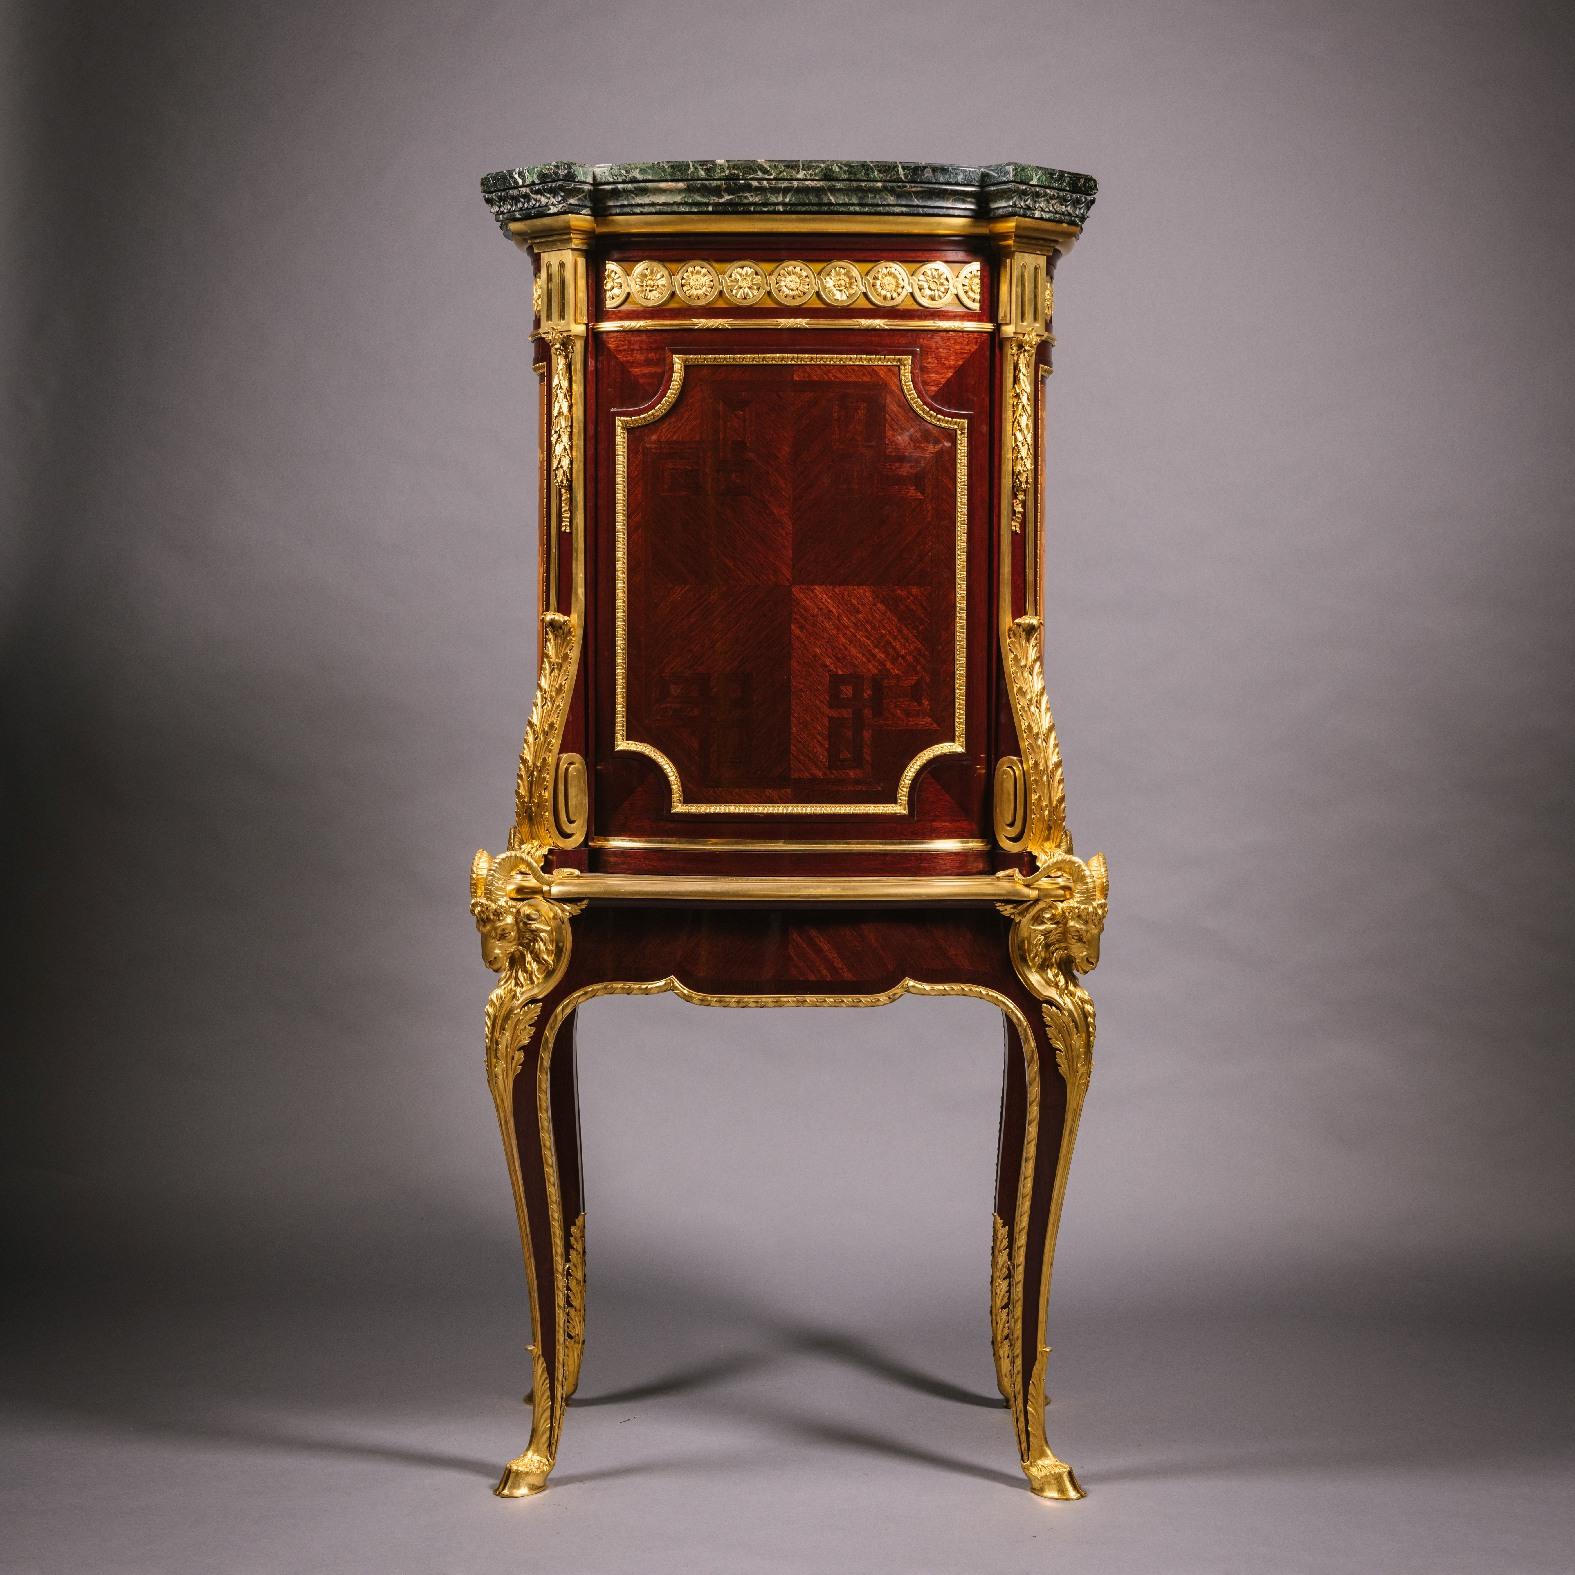 French An Exhibition Gilt-Bronze Mounted Marquetry Cabinet on Stand For Sale